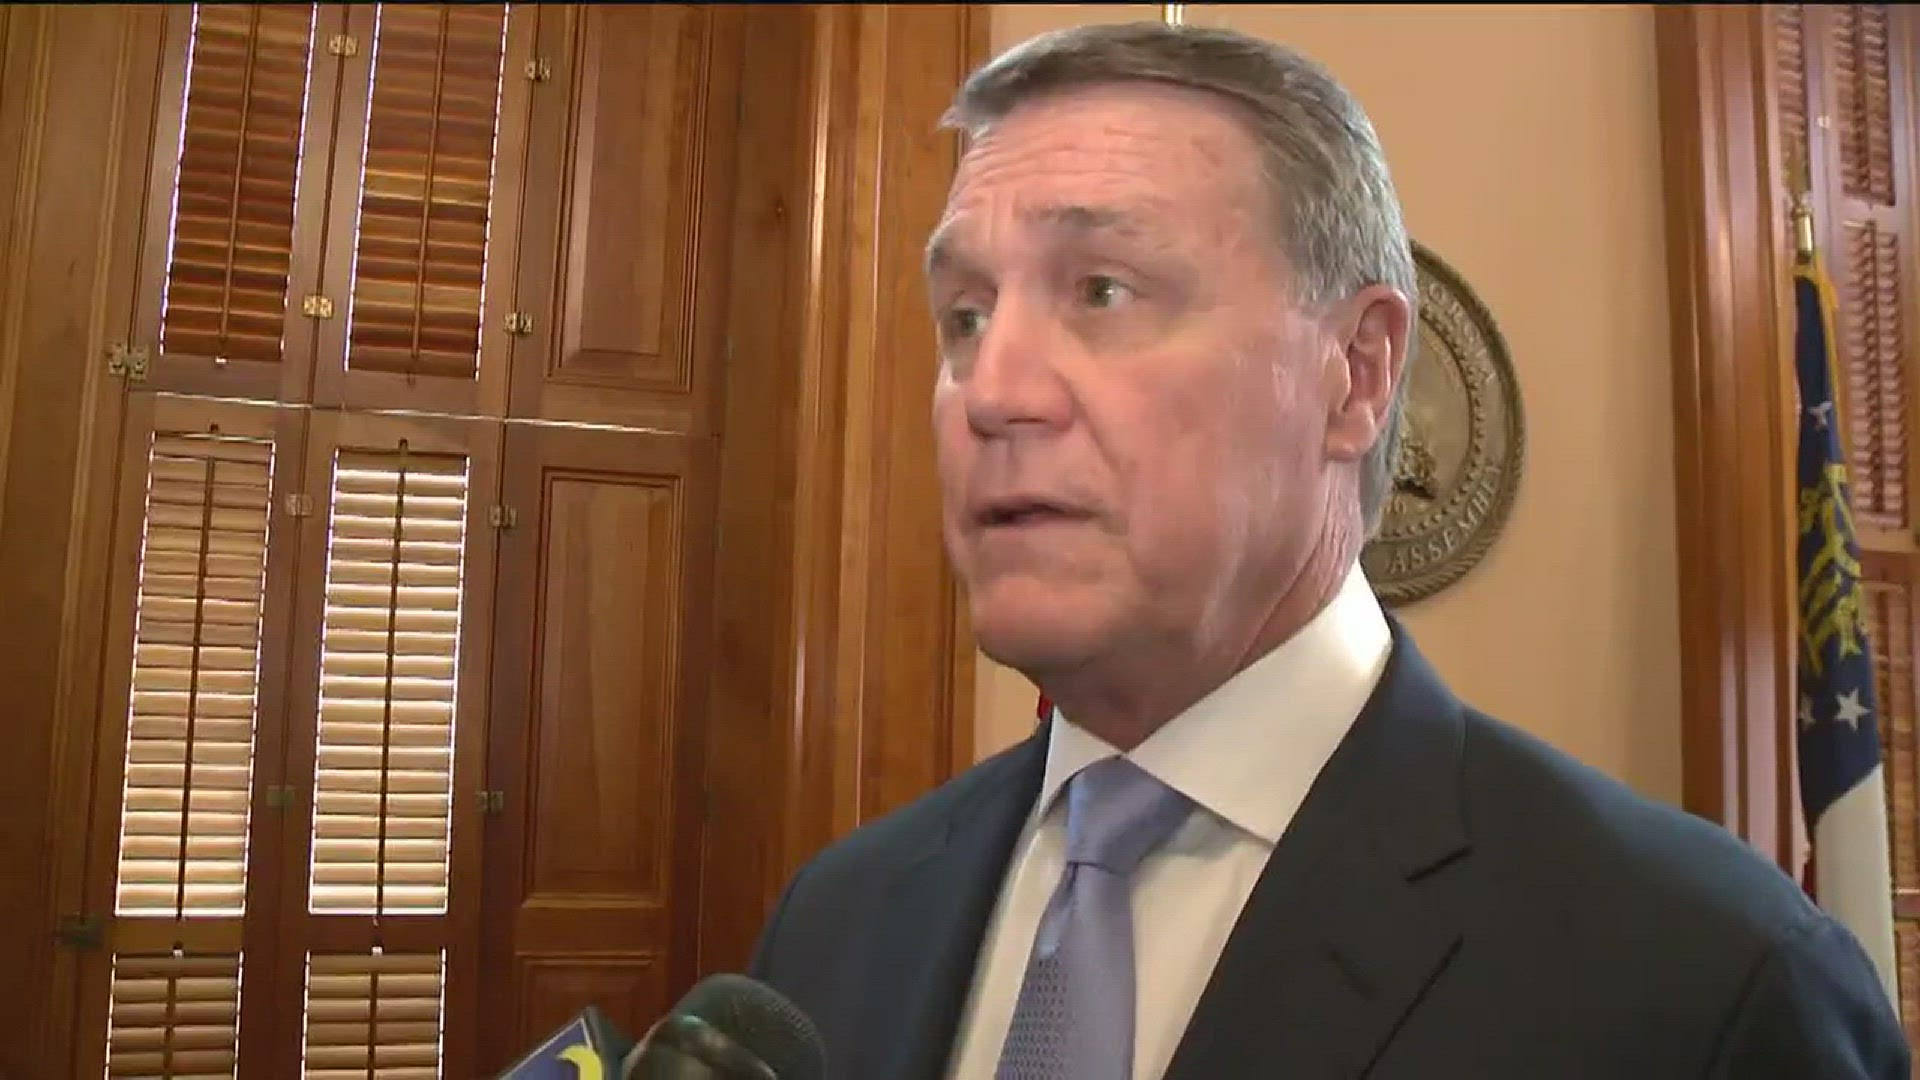 Sen. Perdue has no plans for town hall meetings